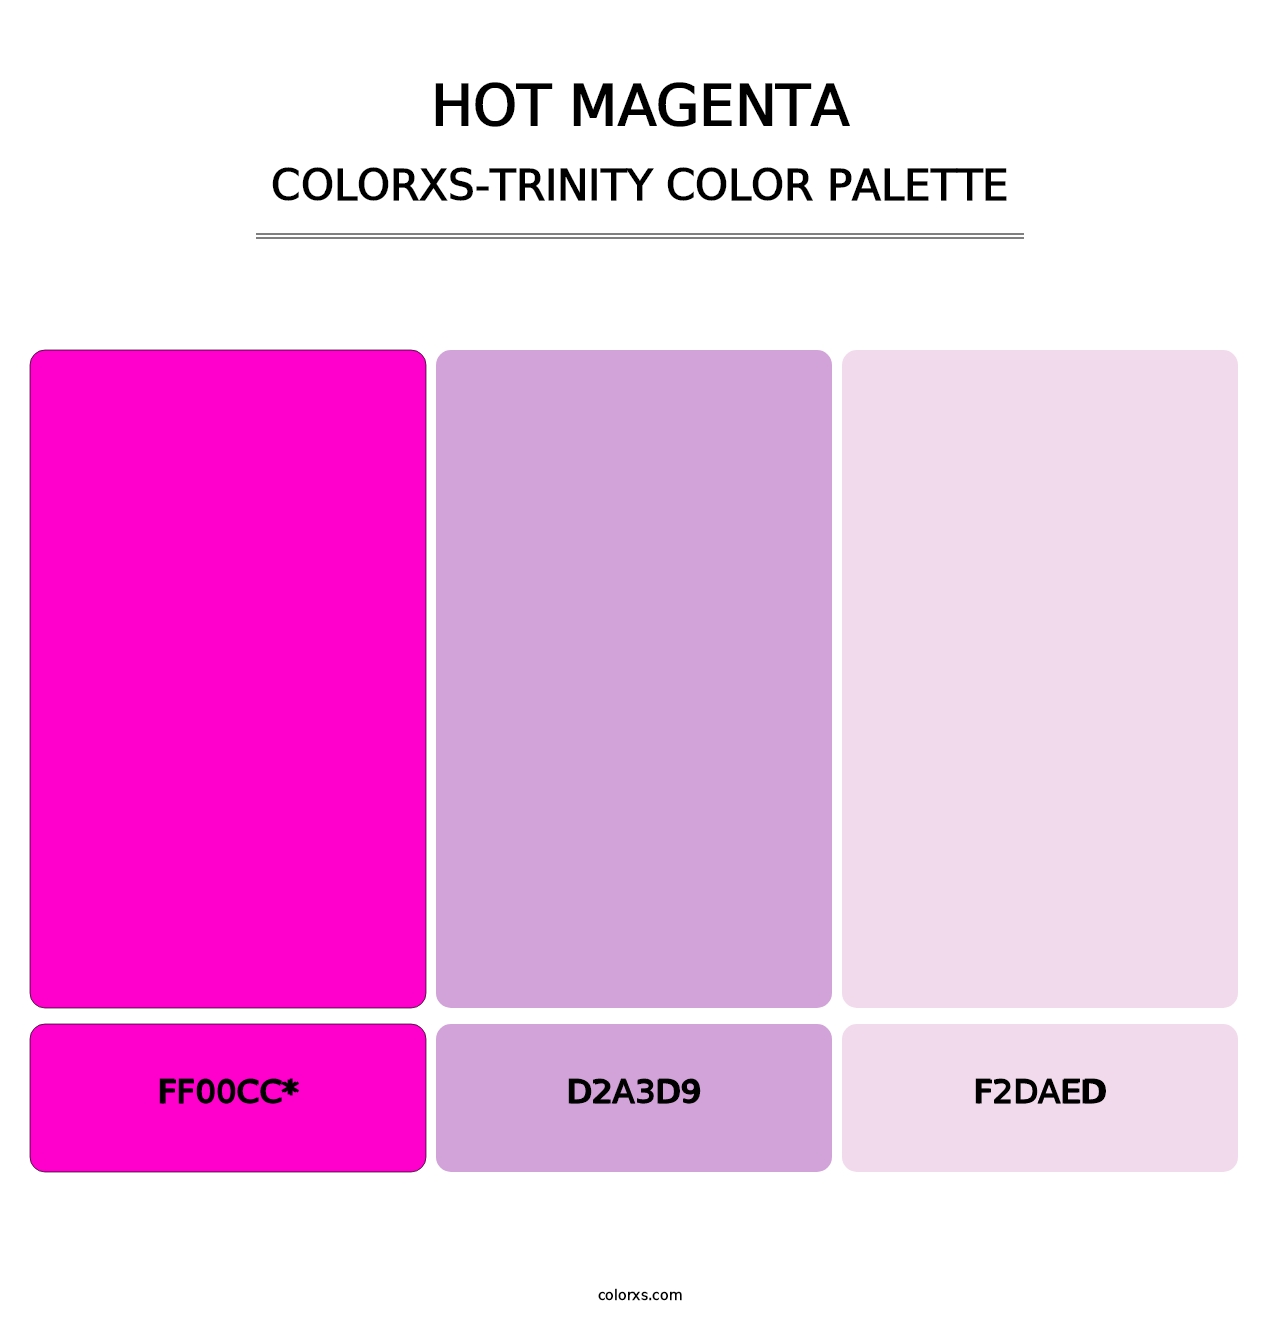 Hot Magenta - Colorxs Trinity Palette